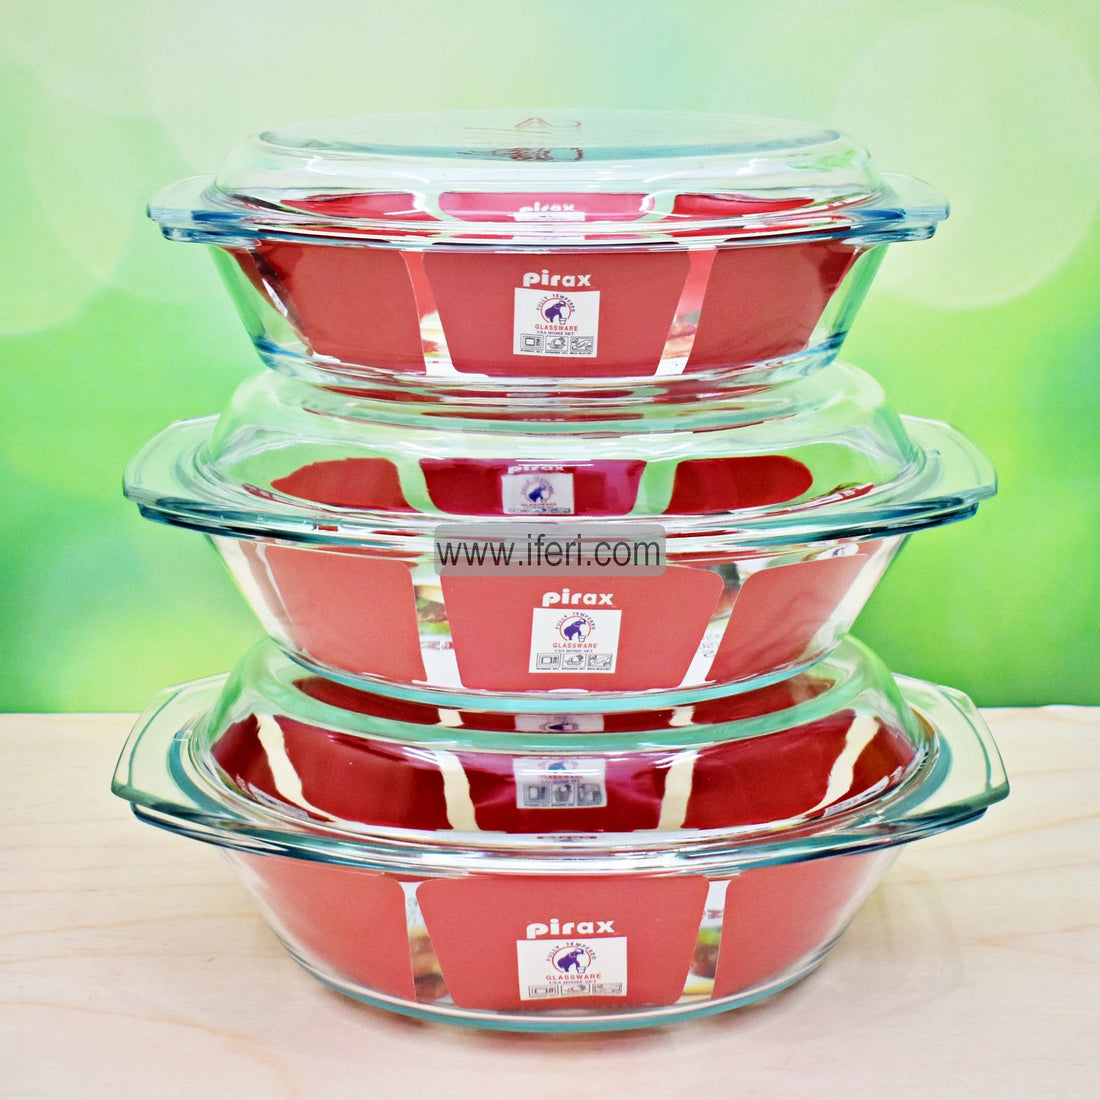 Buy Tempered Glass Oval Shaped Casserole Set through Online from iferi.com in Bangladesh